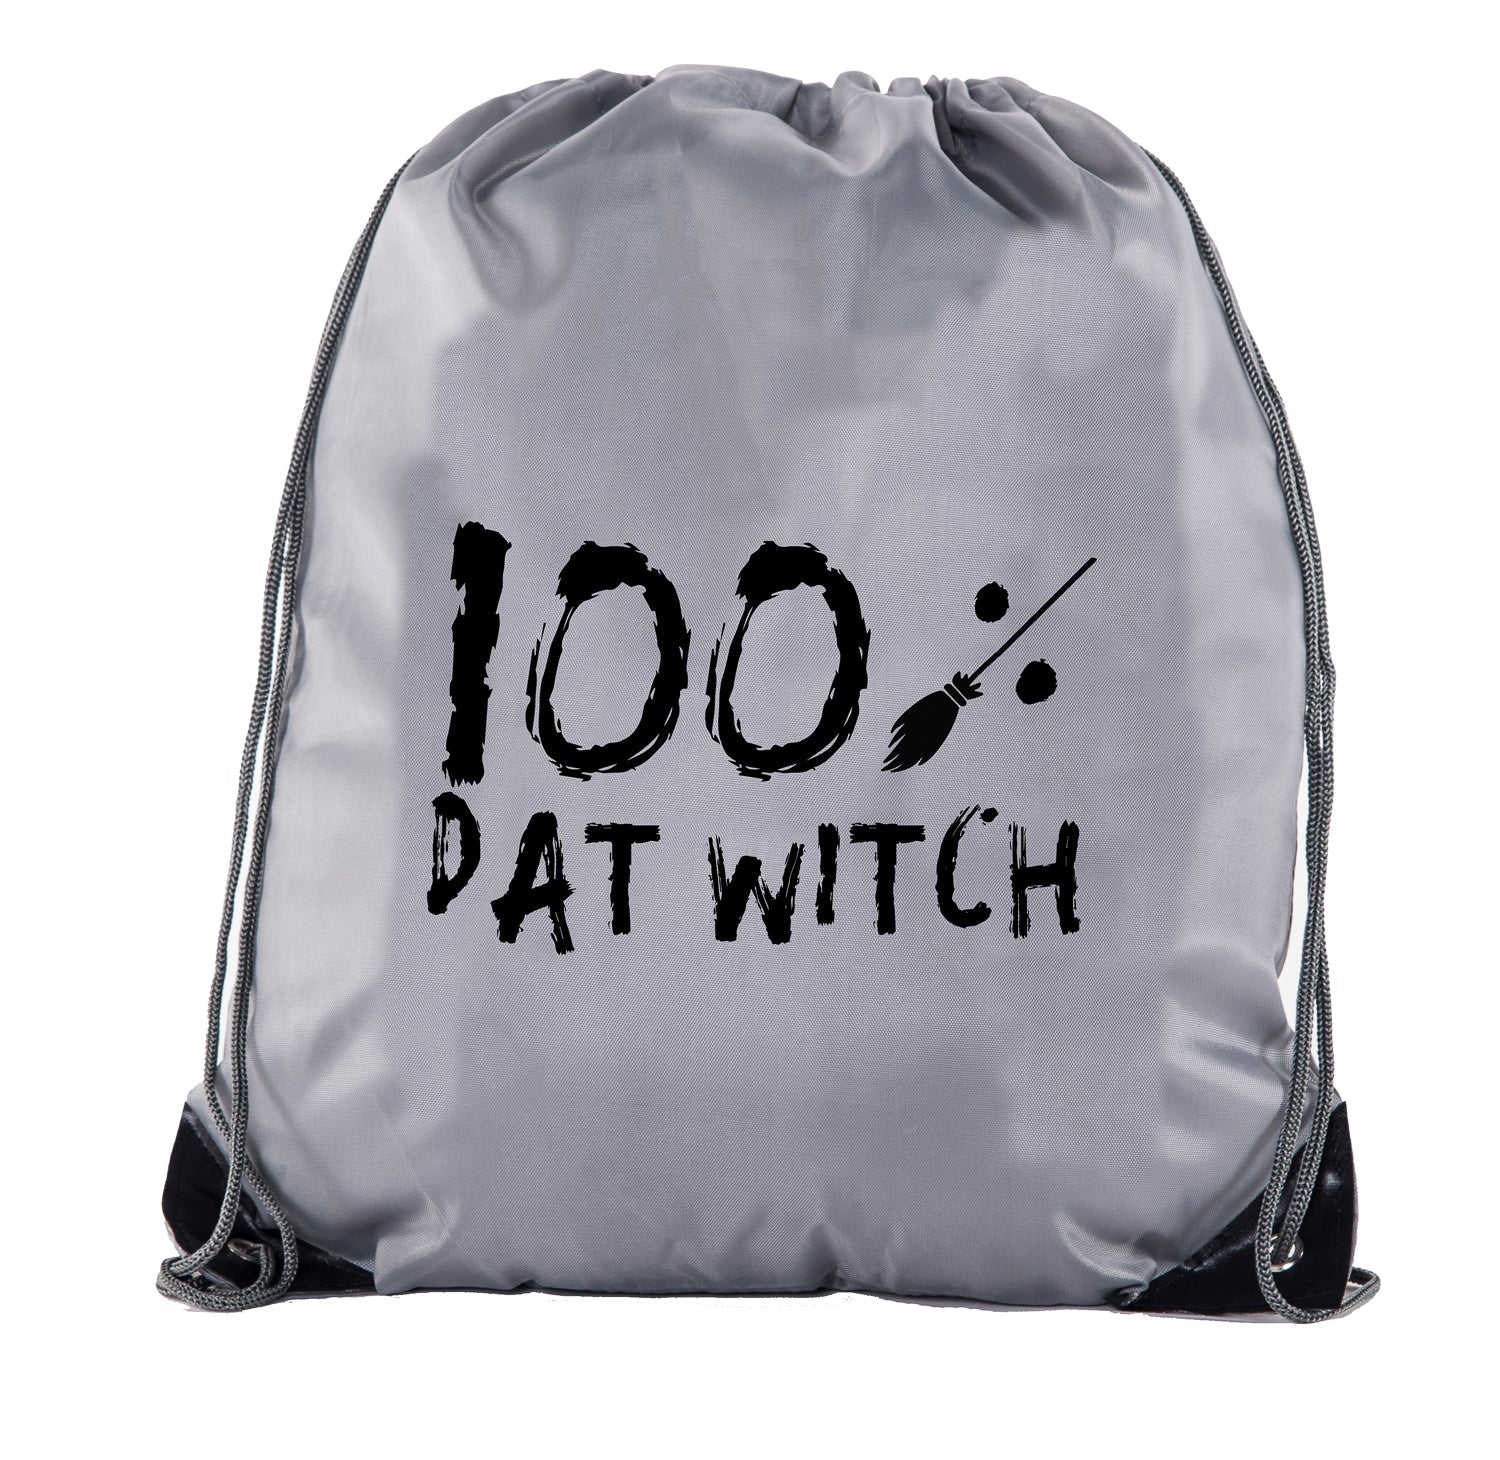 Accessory - 100% Dat Witch Drawstring Bags, Halloween Candy Bags, Halloween Party Cinch Bags